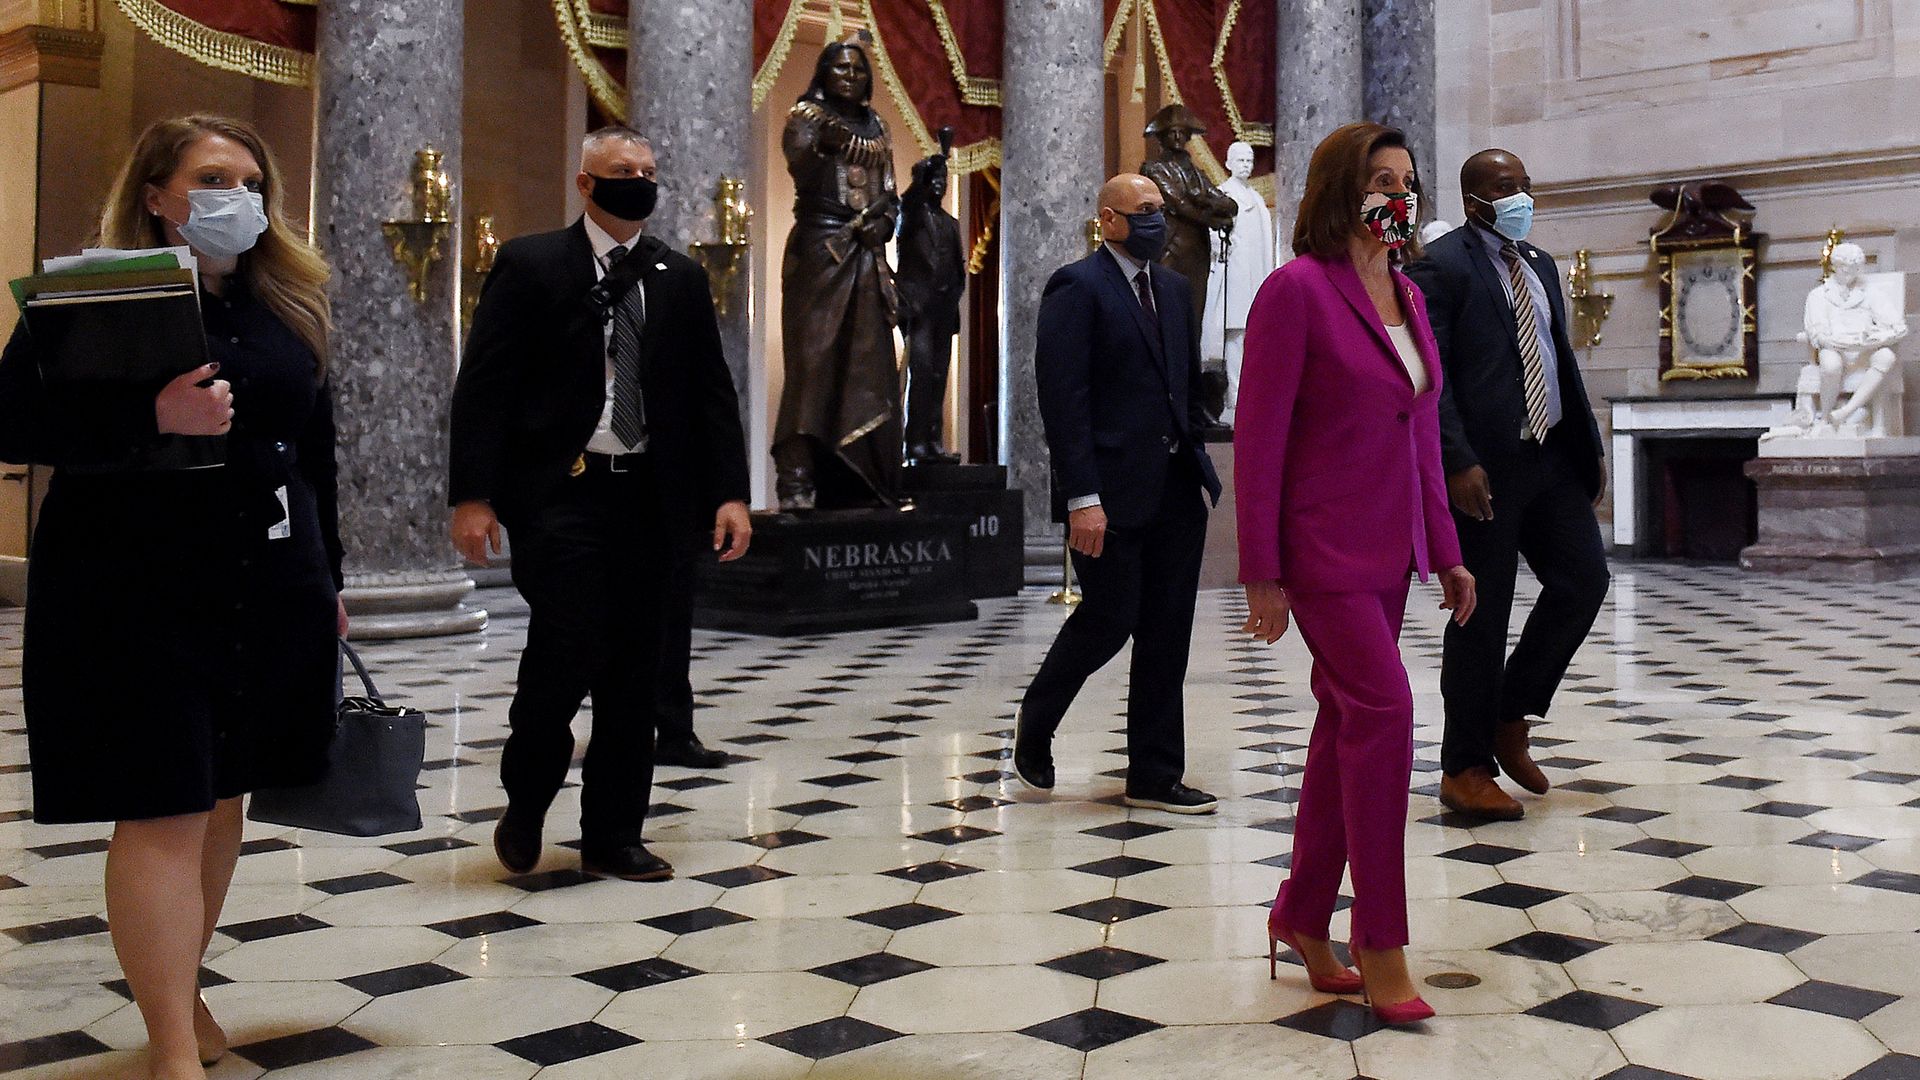 In this image, Nancy Pelosi walks ahead of others 